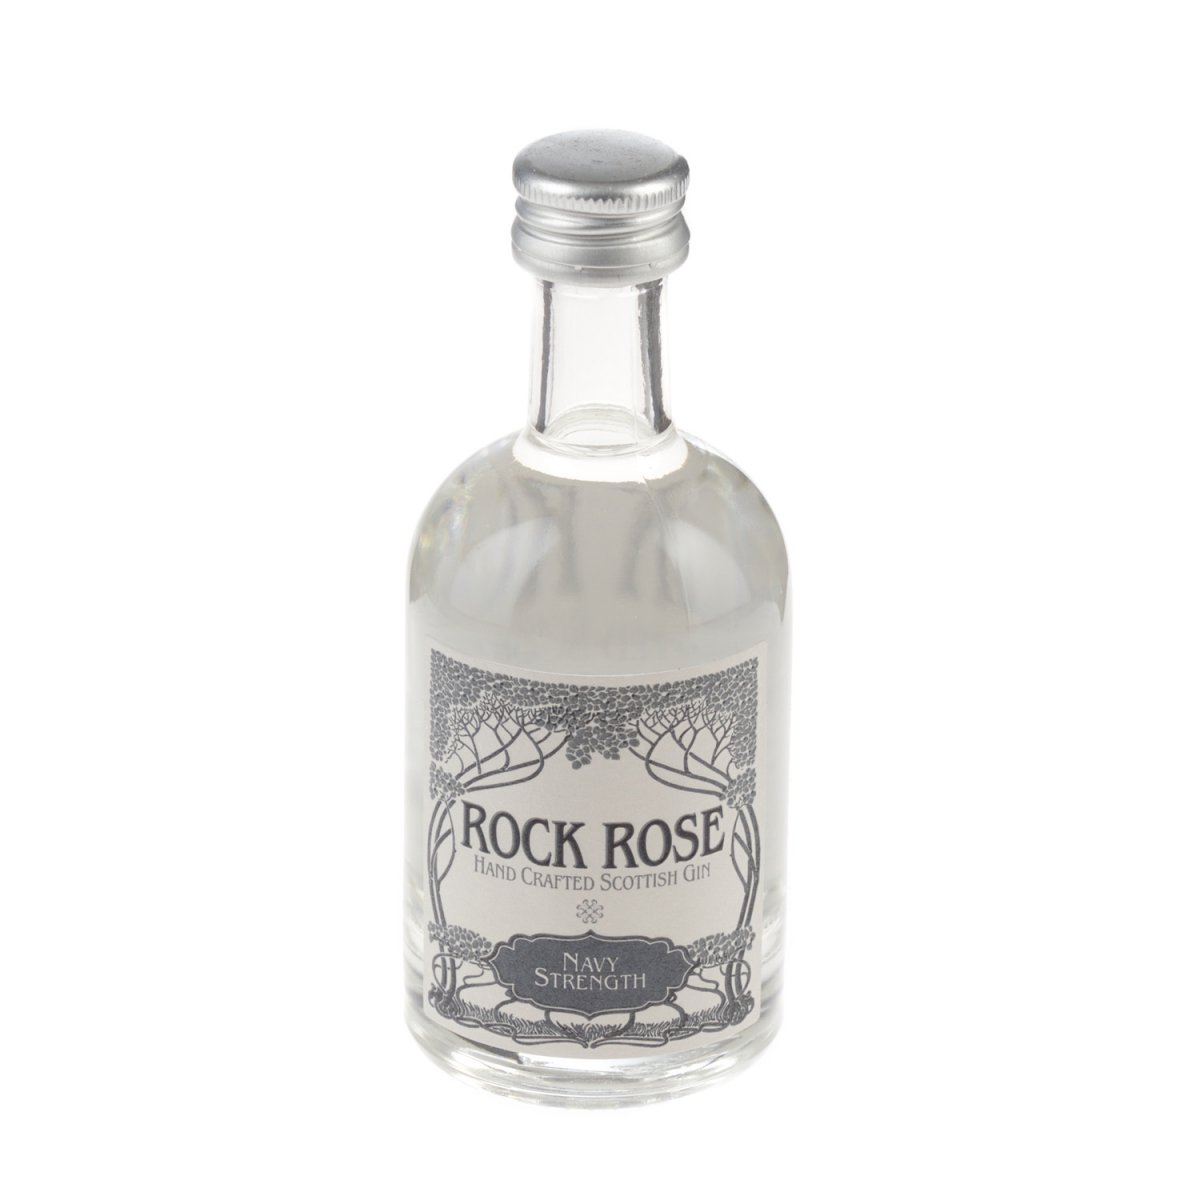 Rock Rose "Navy Strength" Gin Miniature 5cl Bottle - Click Image to Close